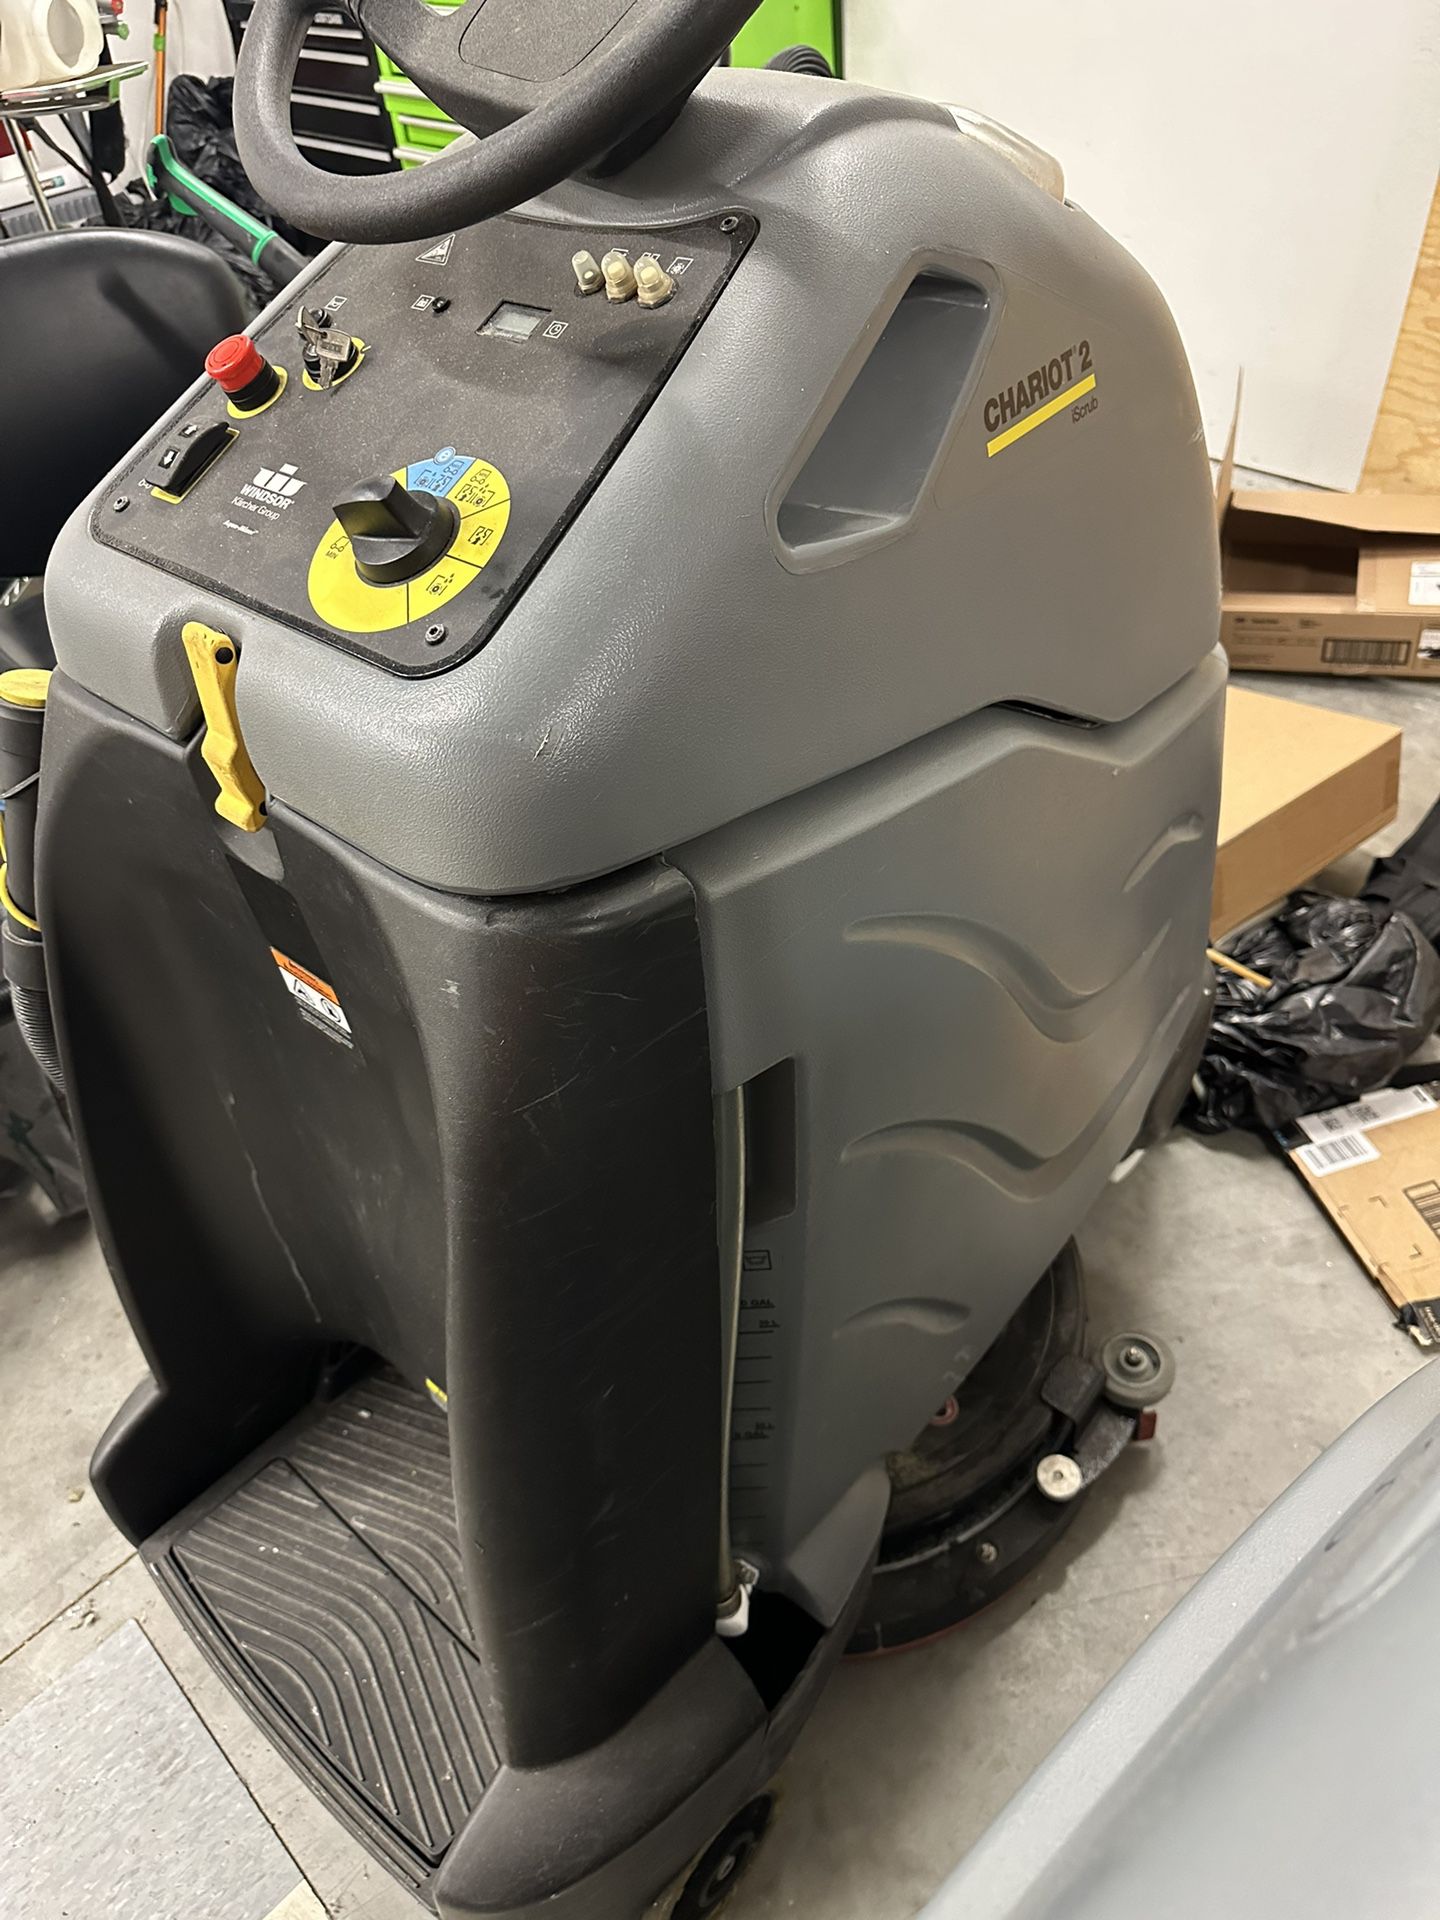 Karcher Chariot 2 Ride On Scrubber and Vacuum U